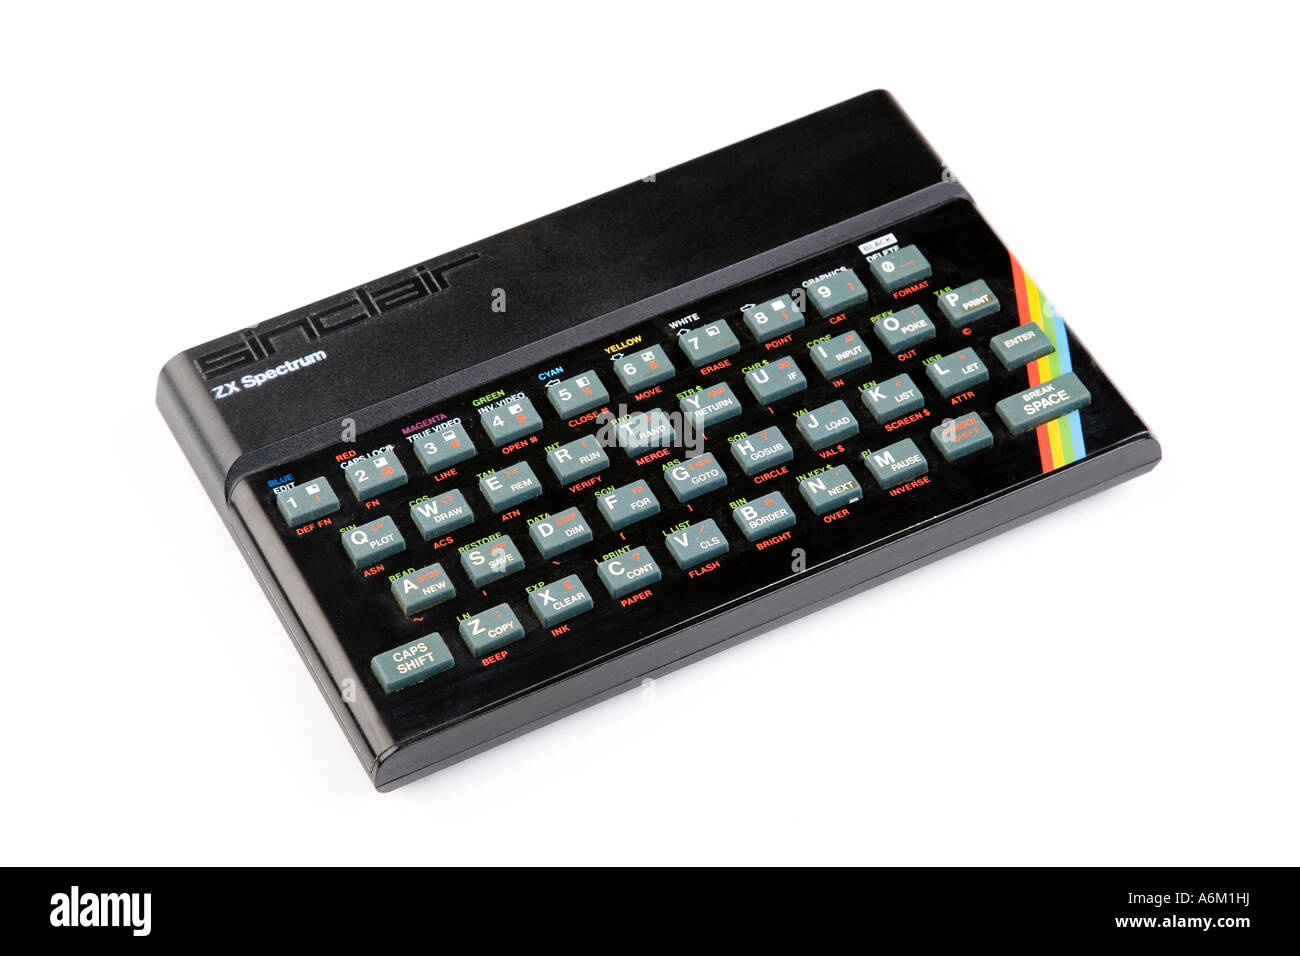 Sinclair Spectrum home computer from the early 1980's with 48KB RAM Stock Photo